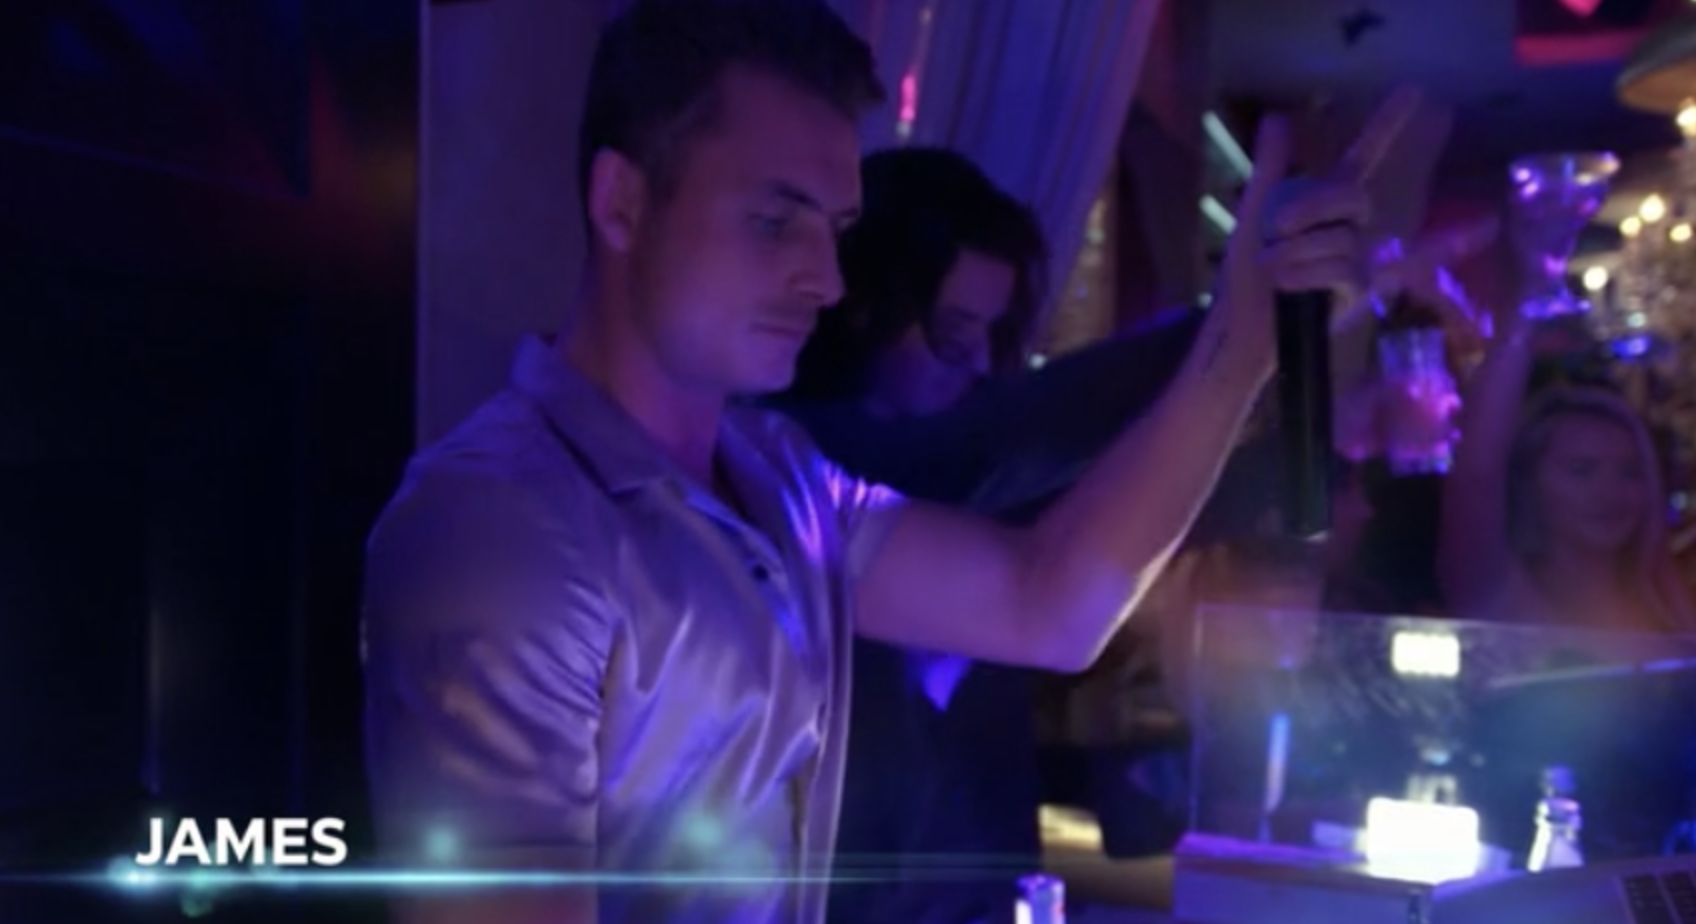 James stands behind a DJ booth with a microphone in a satin purple shirt